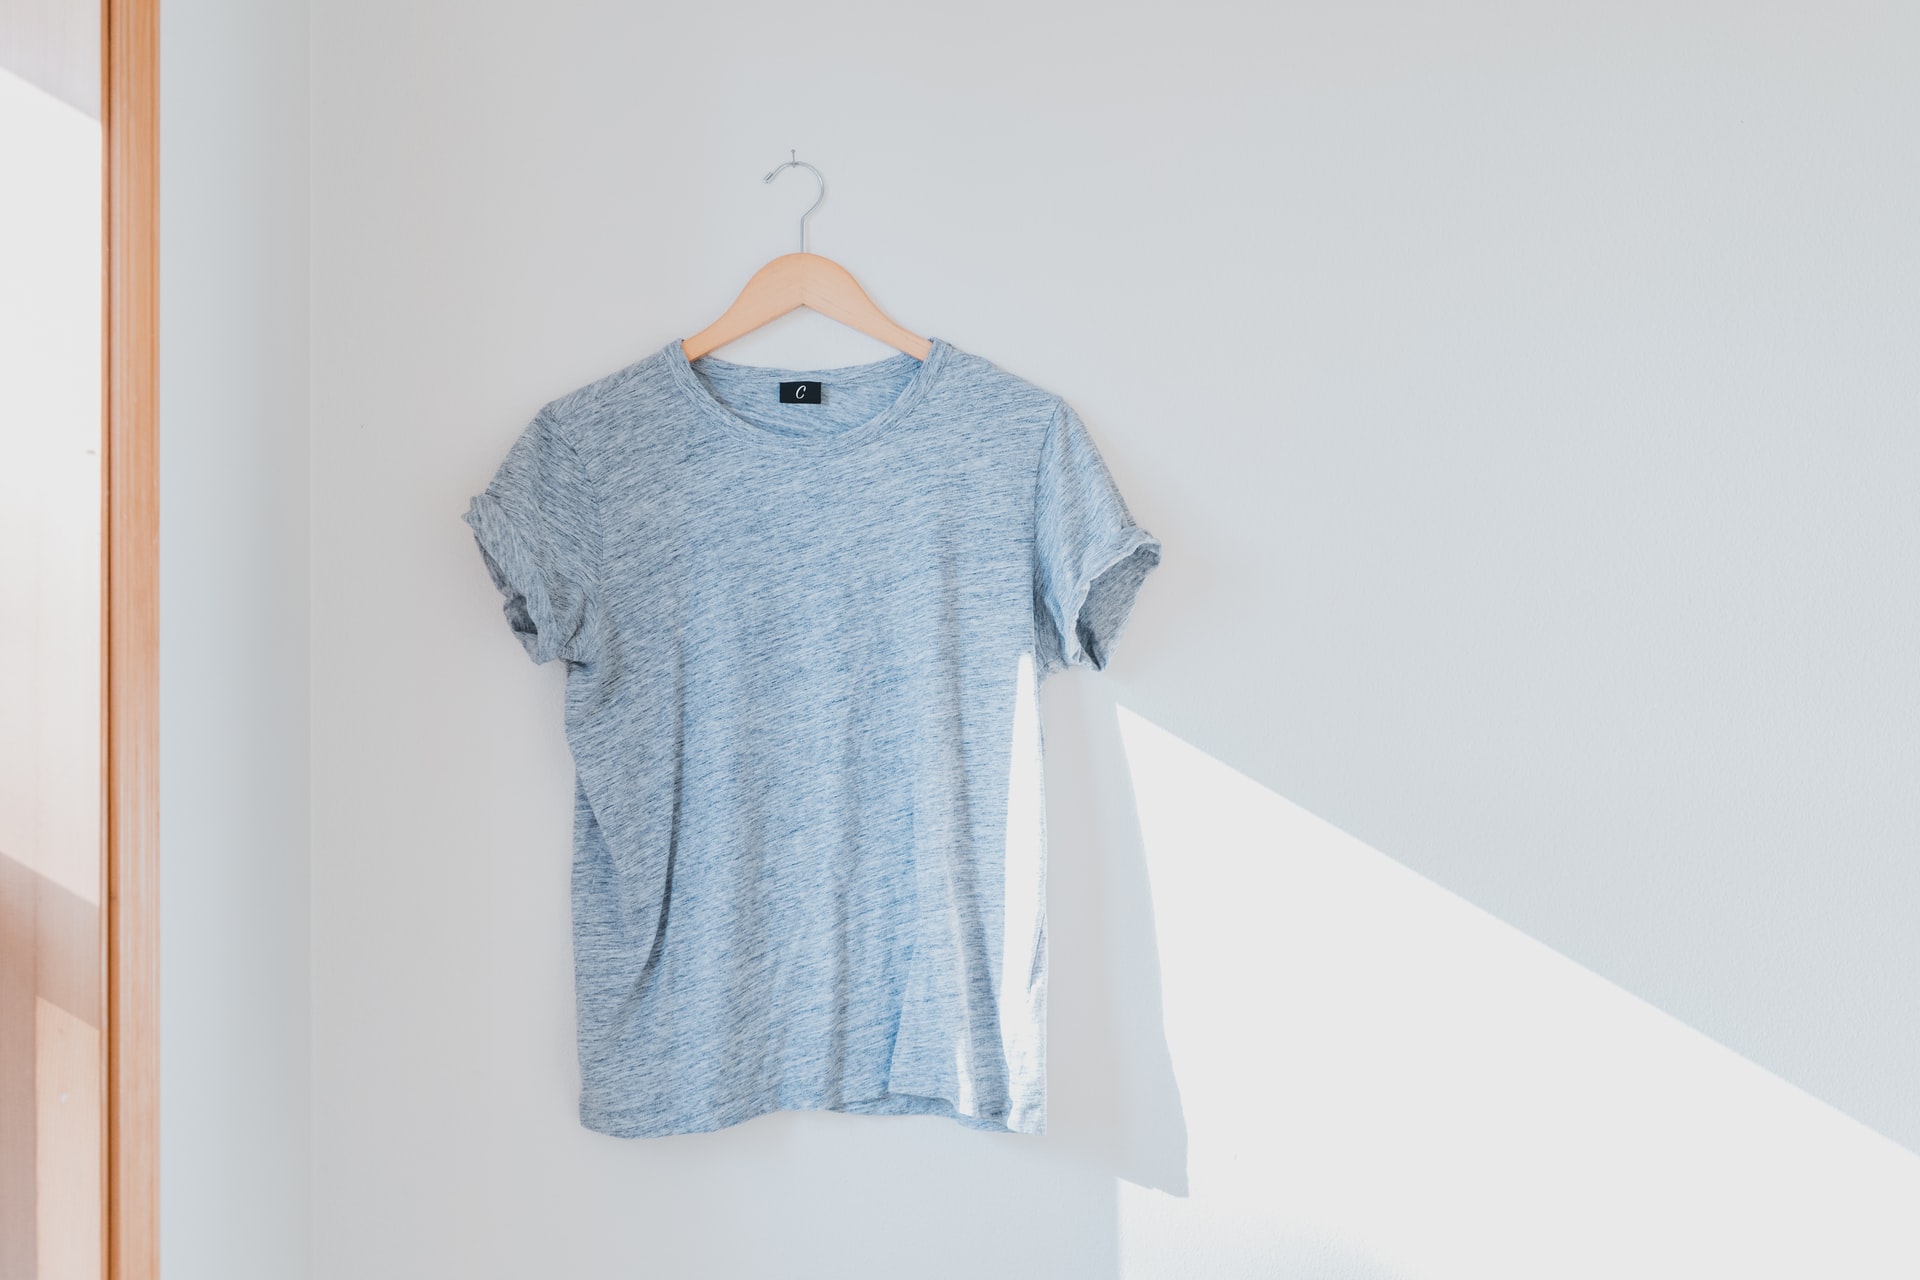 Another example of how to take good pictures of clothes to sell: t-shirt hanging on a white wall